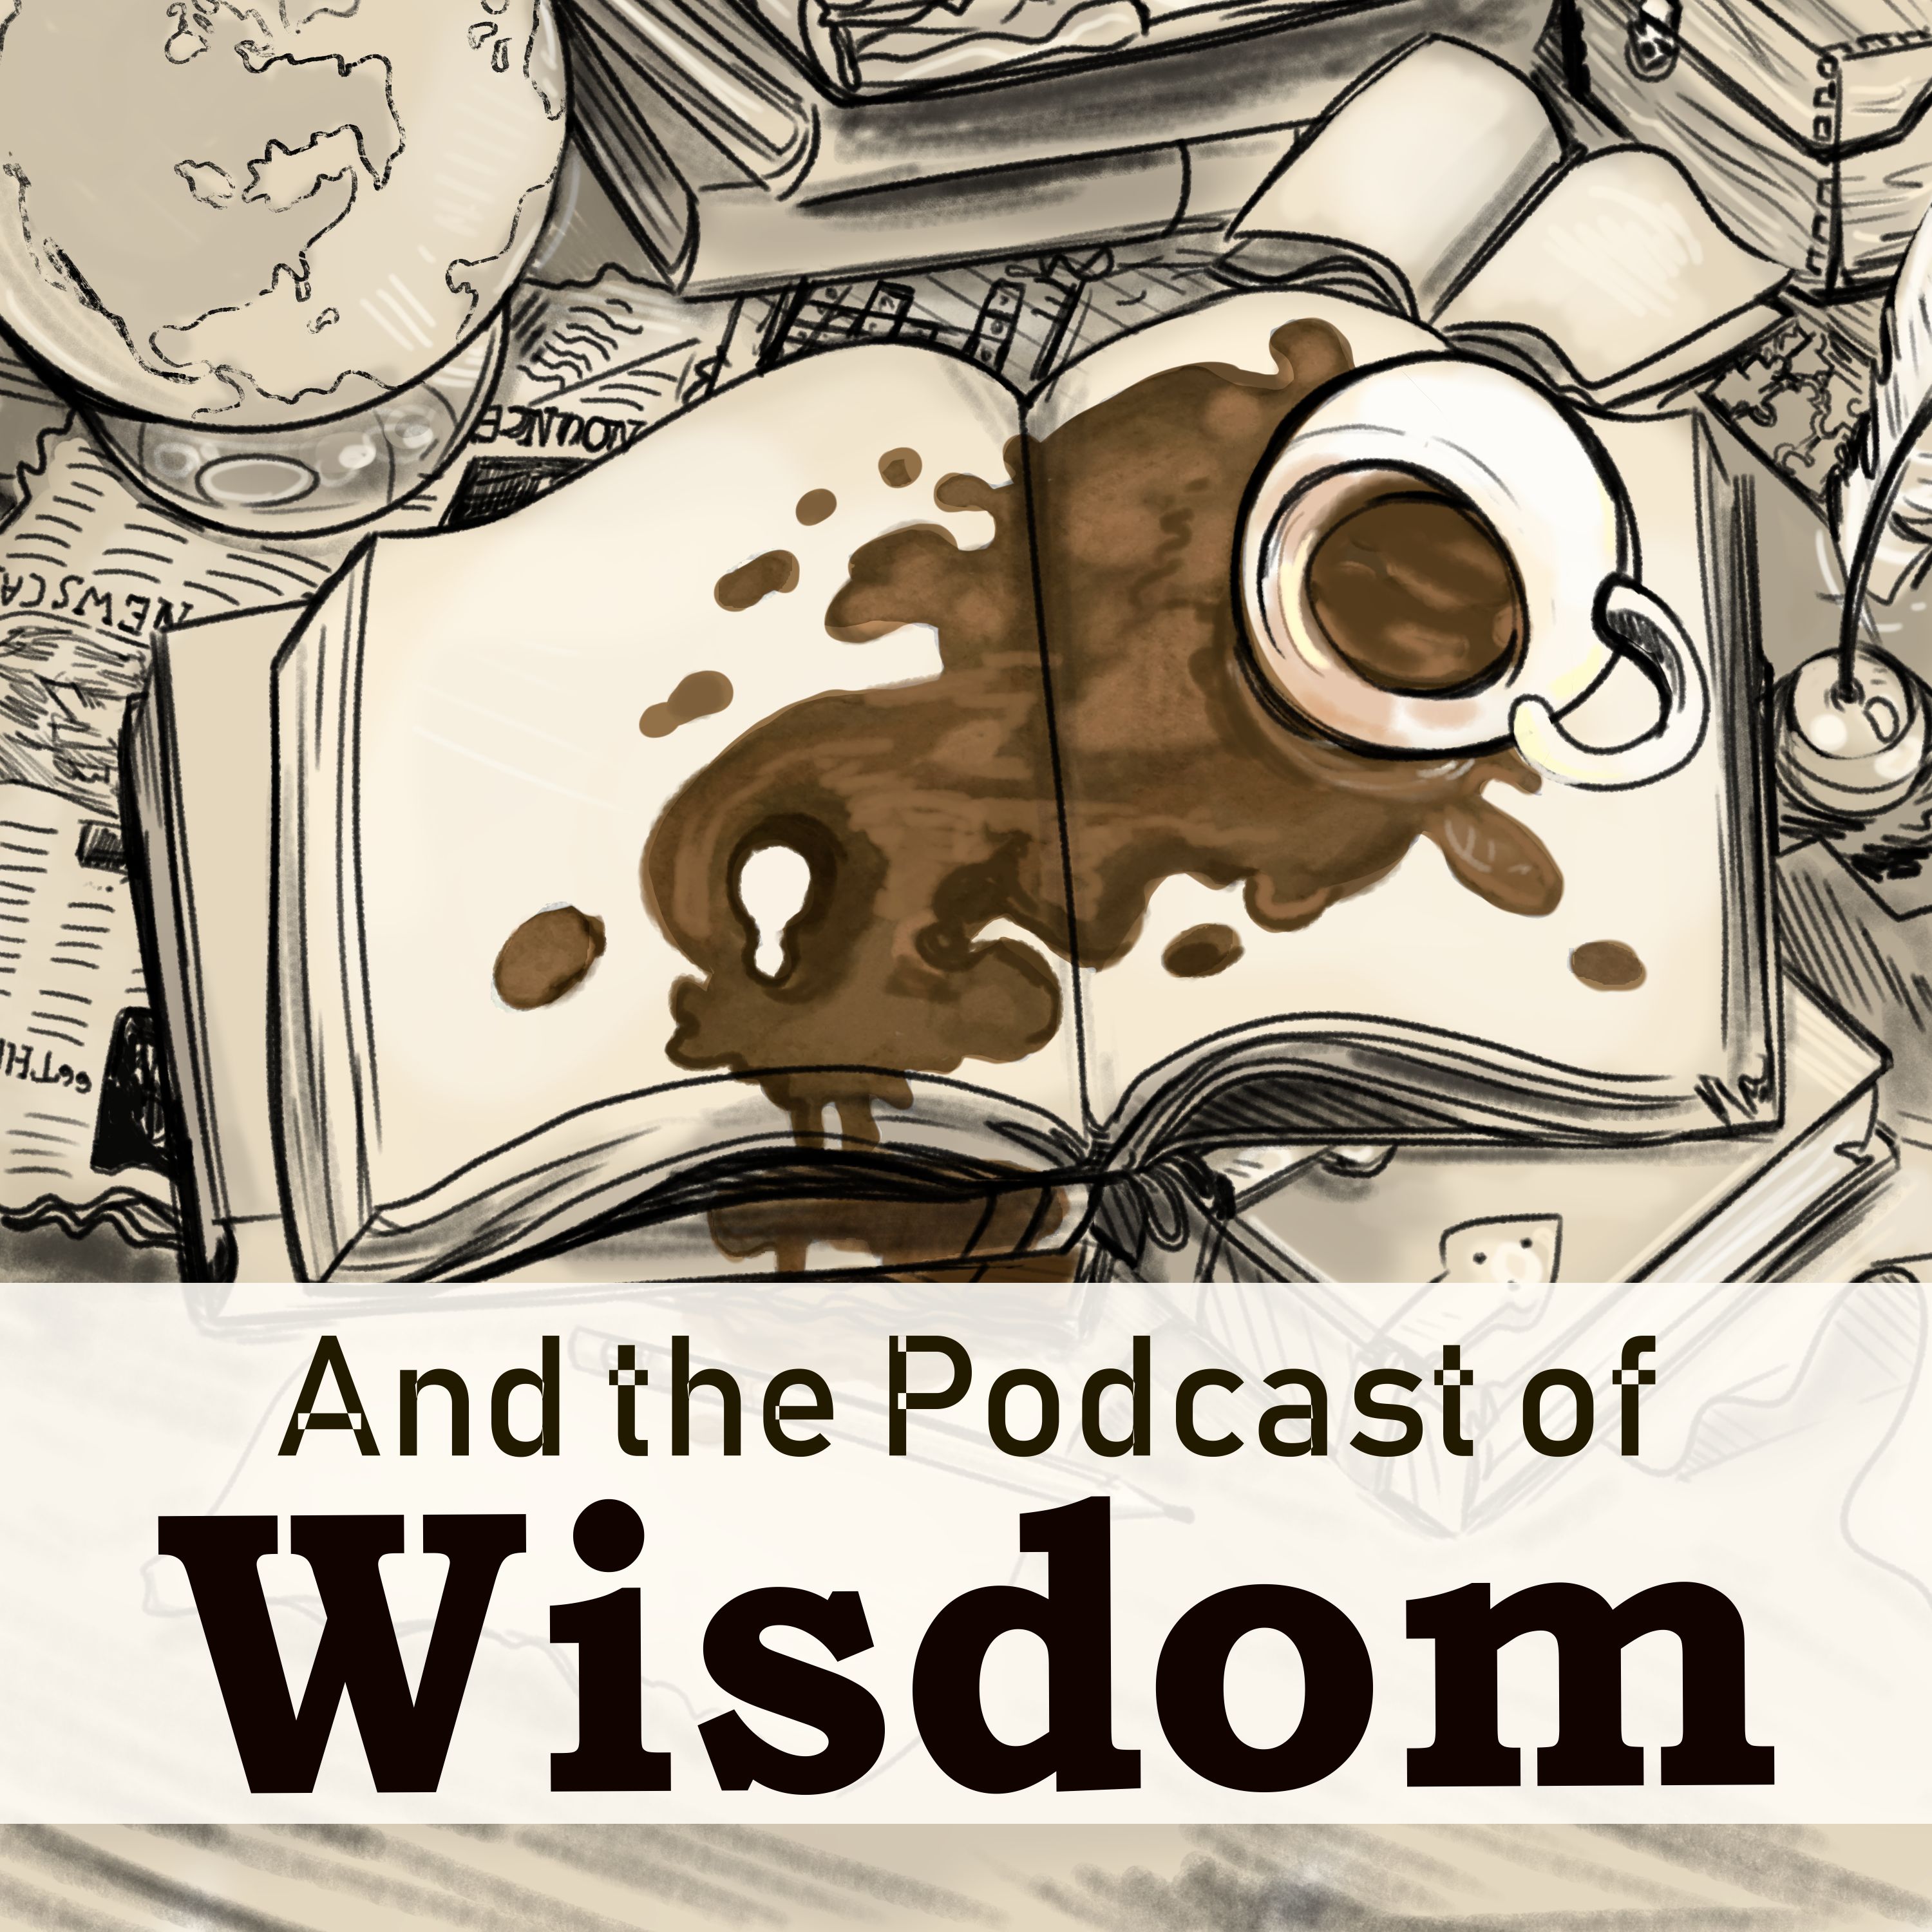 And the Podcast of Wisdom